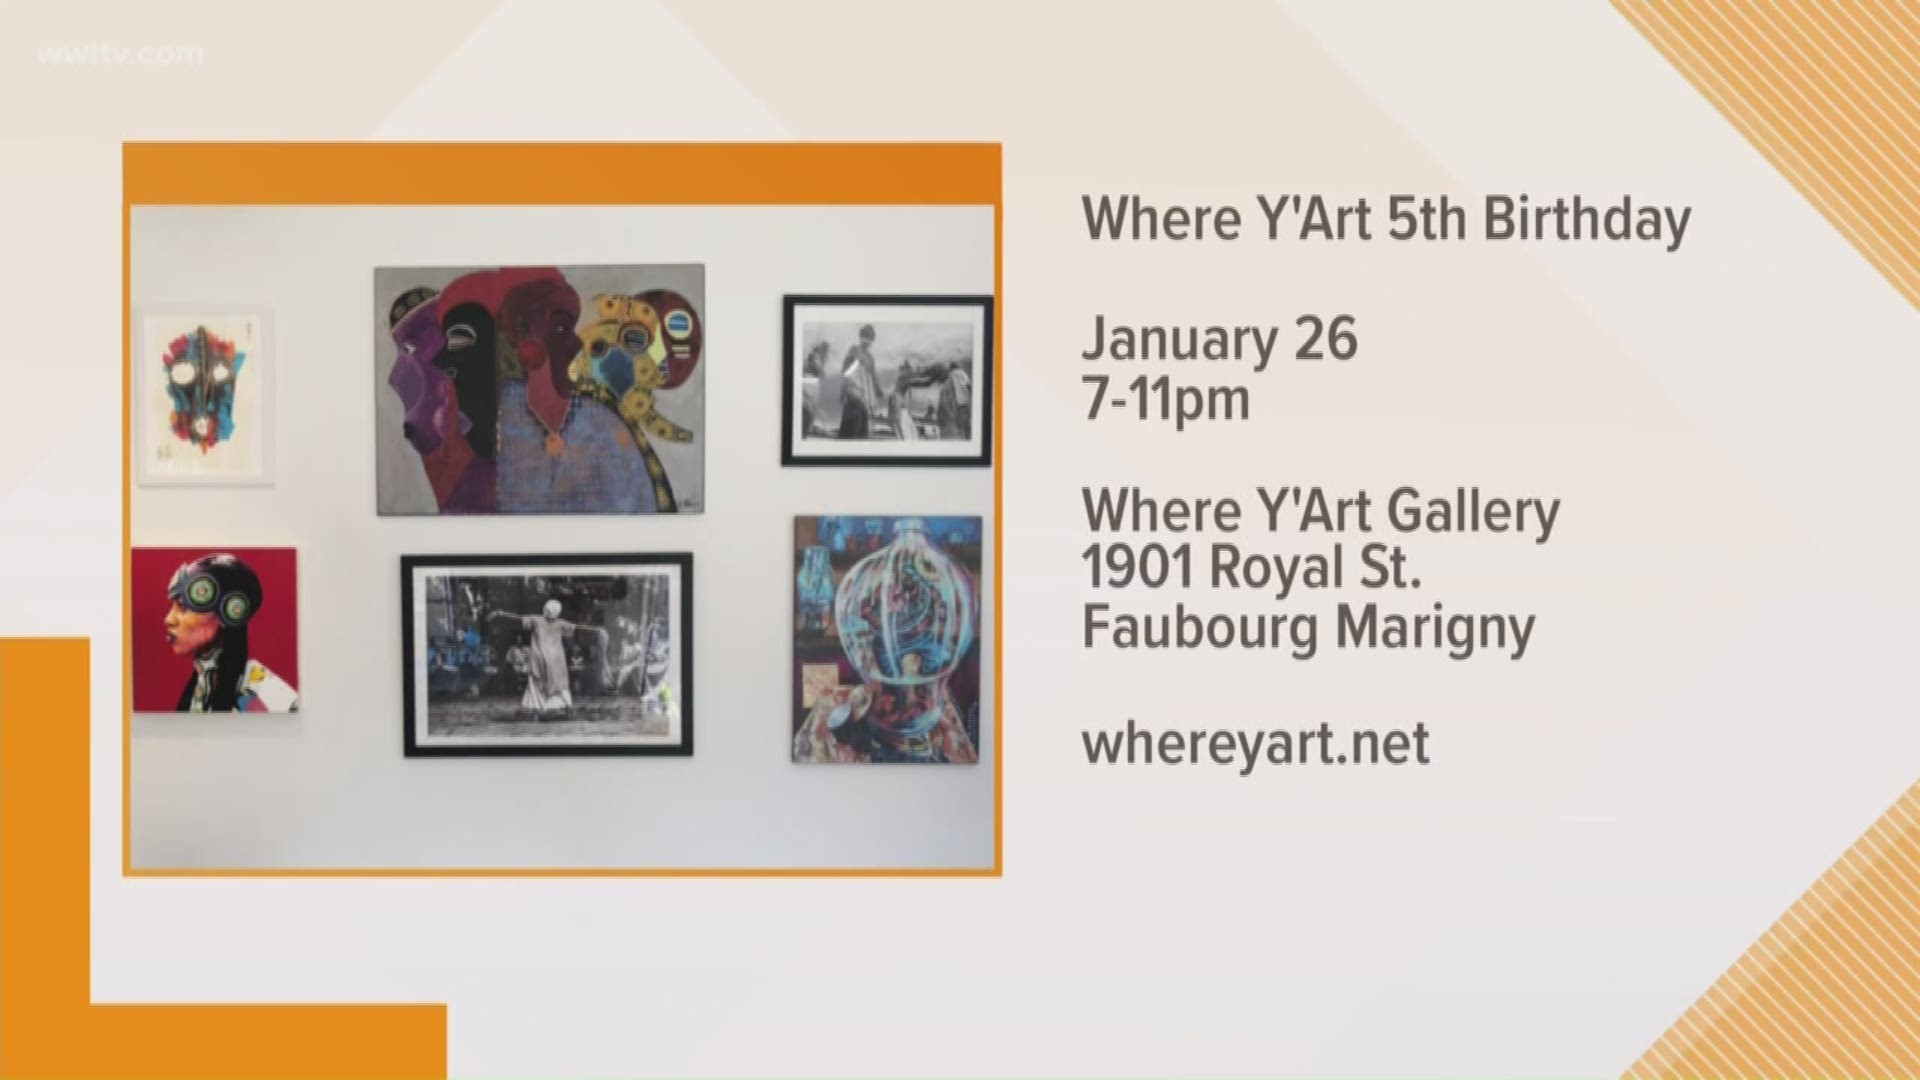 Where Y'Art launched in December 2013 with a little under 40 artists and now service 140 artists.